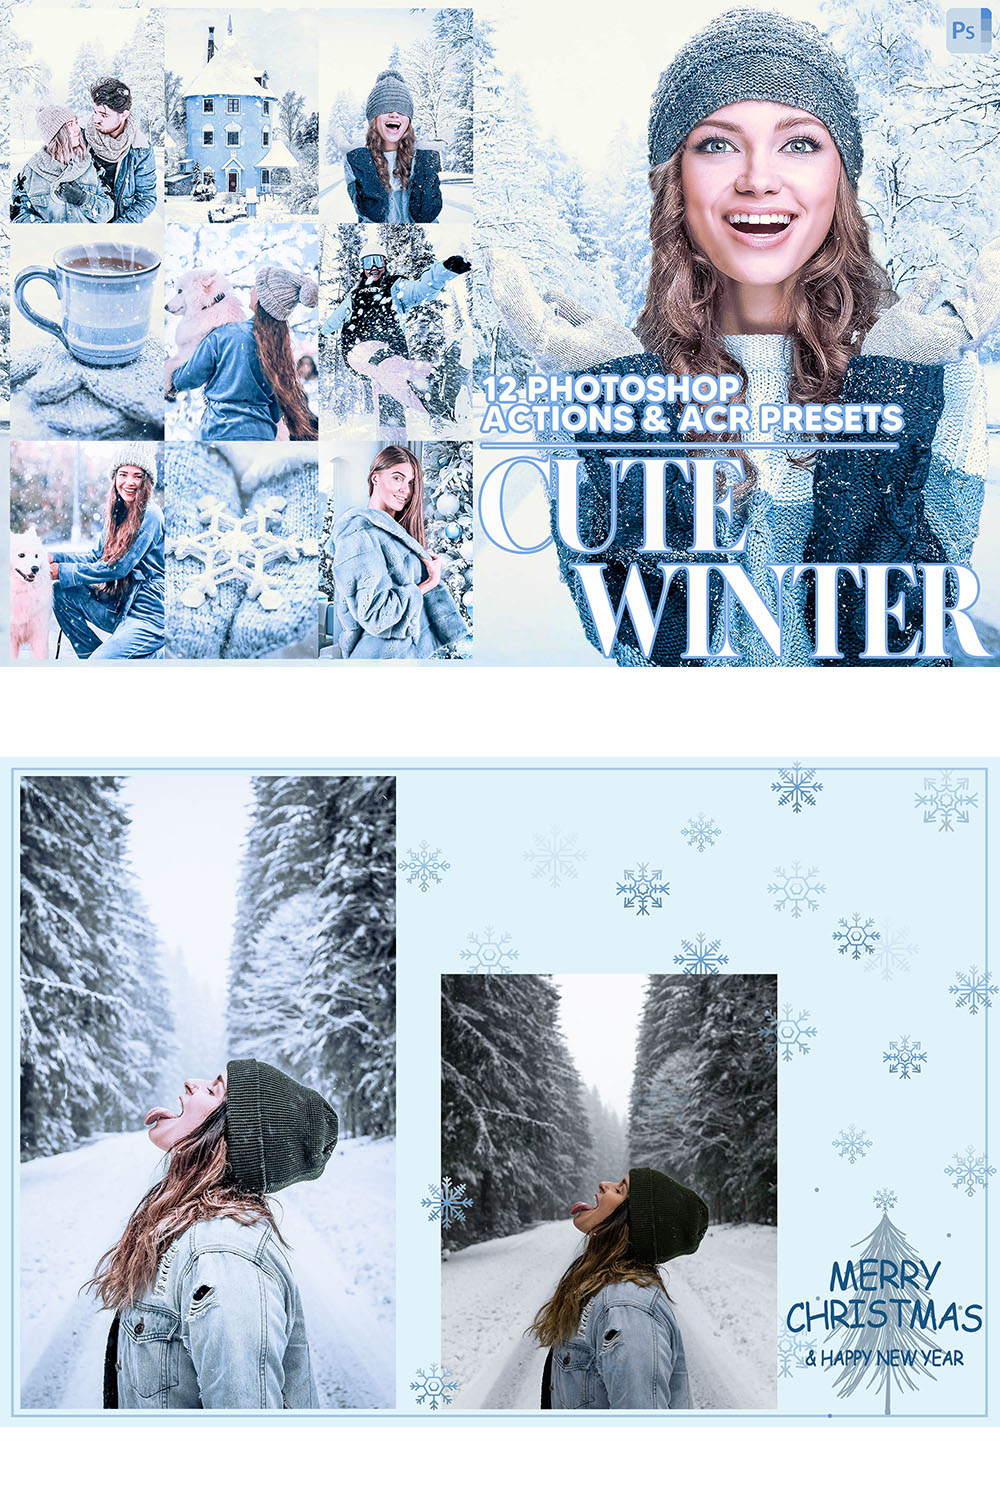 12 Photoshop Actions, Cute Winter Ps Action, Snow ACR Preset, Christmas Ps Filter, Atn Portrait And Lifestyle Theme For Instagram, Blogger pinterest preview image.